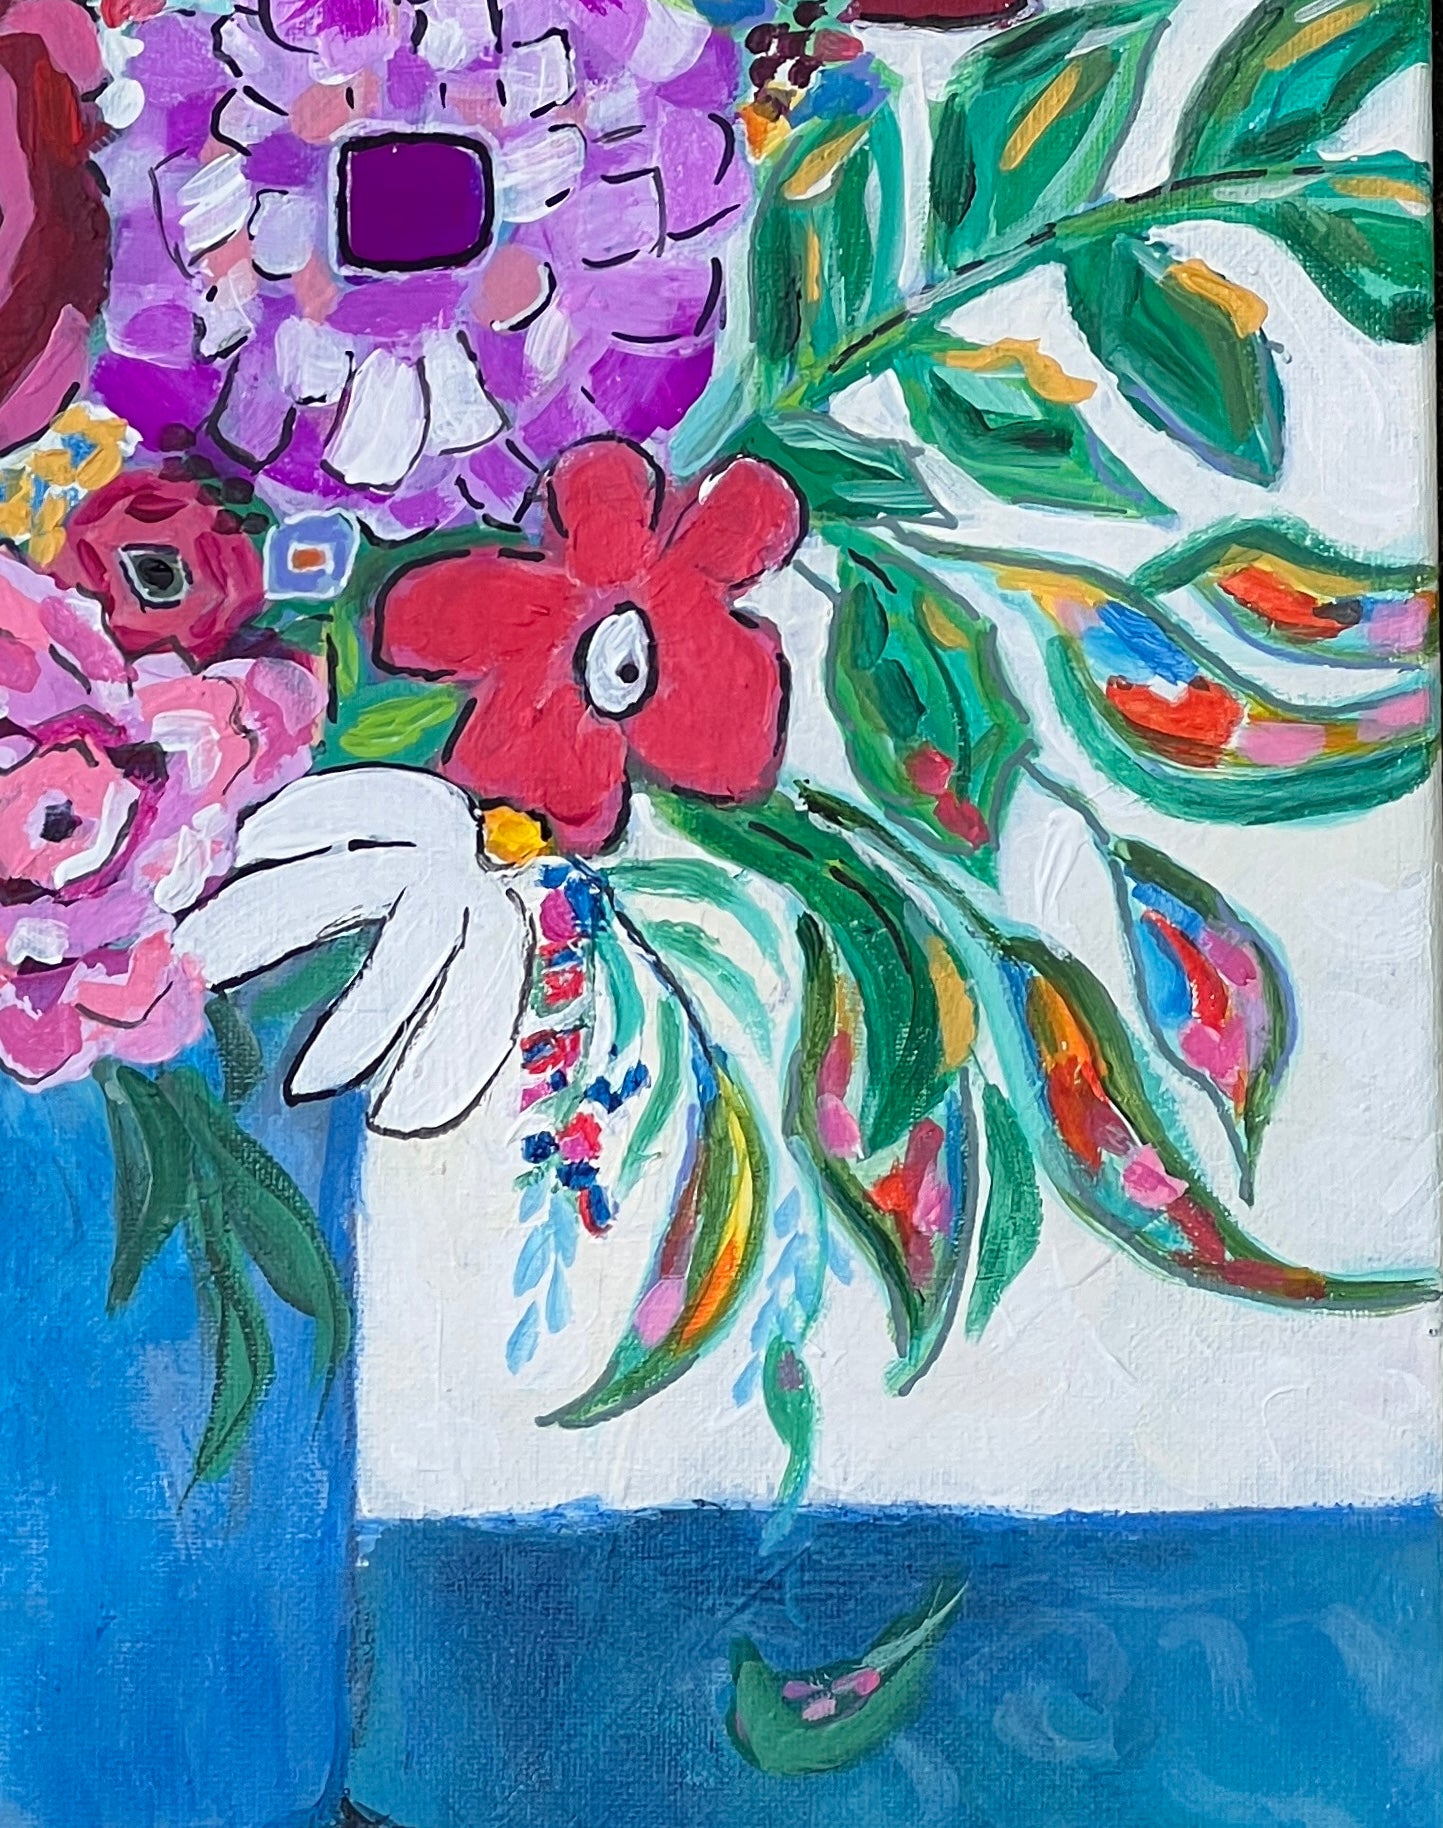 detail shot of floral painting in purple, pink and blue